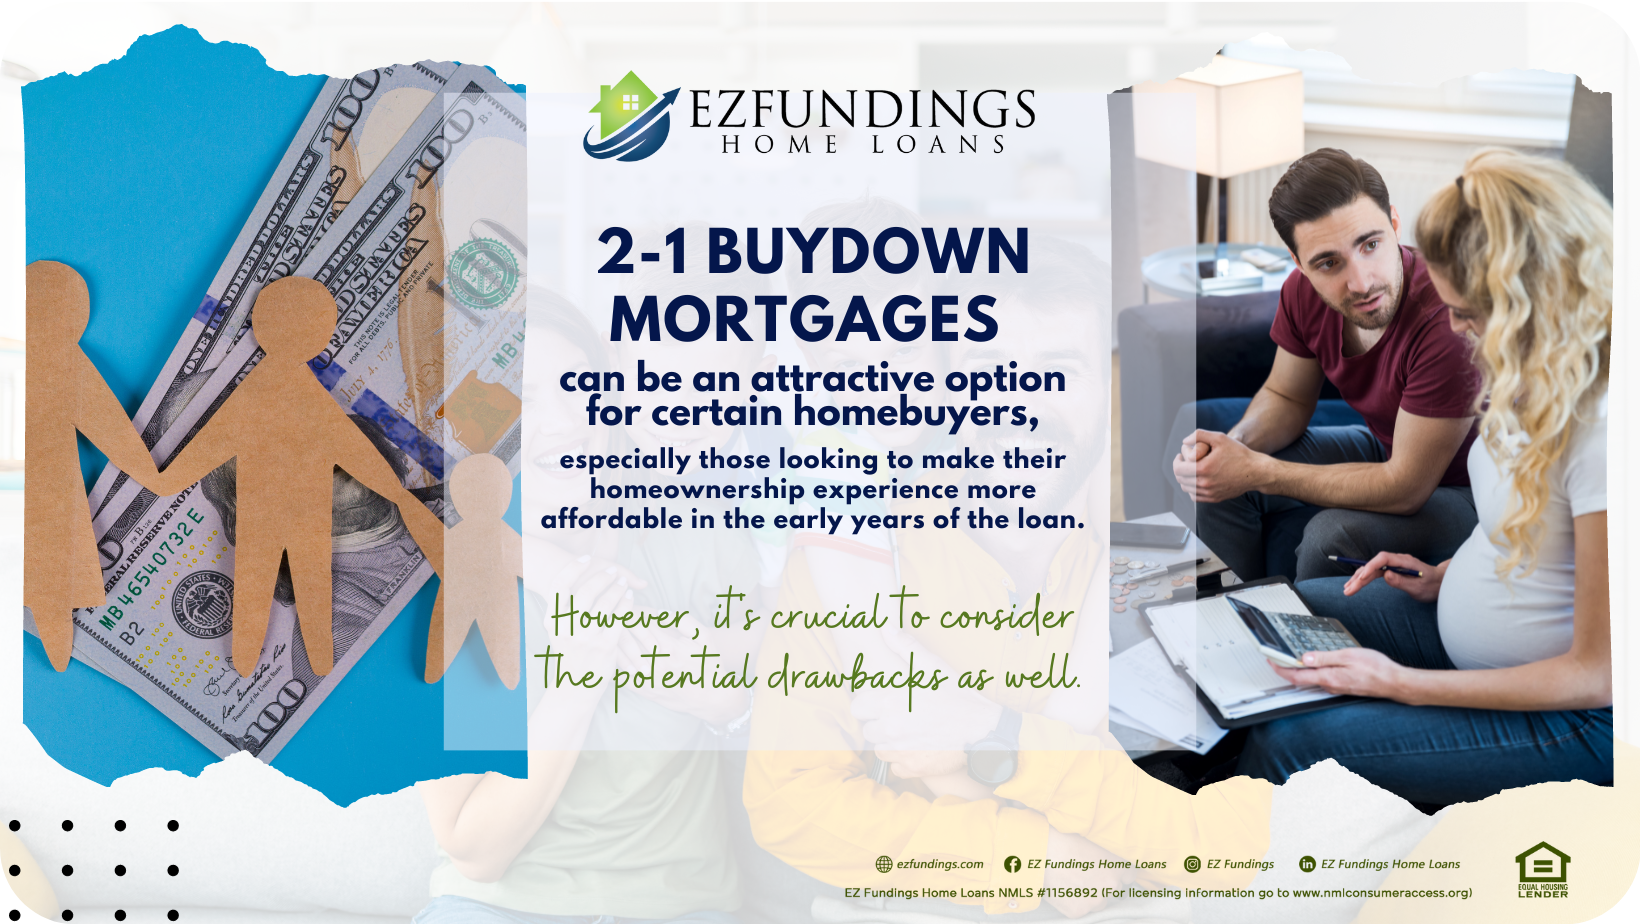 The photo shows two images representing the Pros and Cons of 2-1 Buydown Mortgages. The text says "2-1 buydown mortgages can be an attractive option for certain homebuyers, especially those looking to make their homeownership experience more affordable in the early years of the loan. However, it's crucial to consider the potential drawbacks as well."